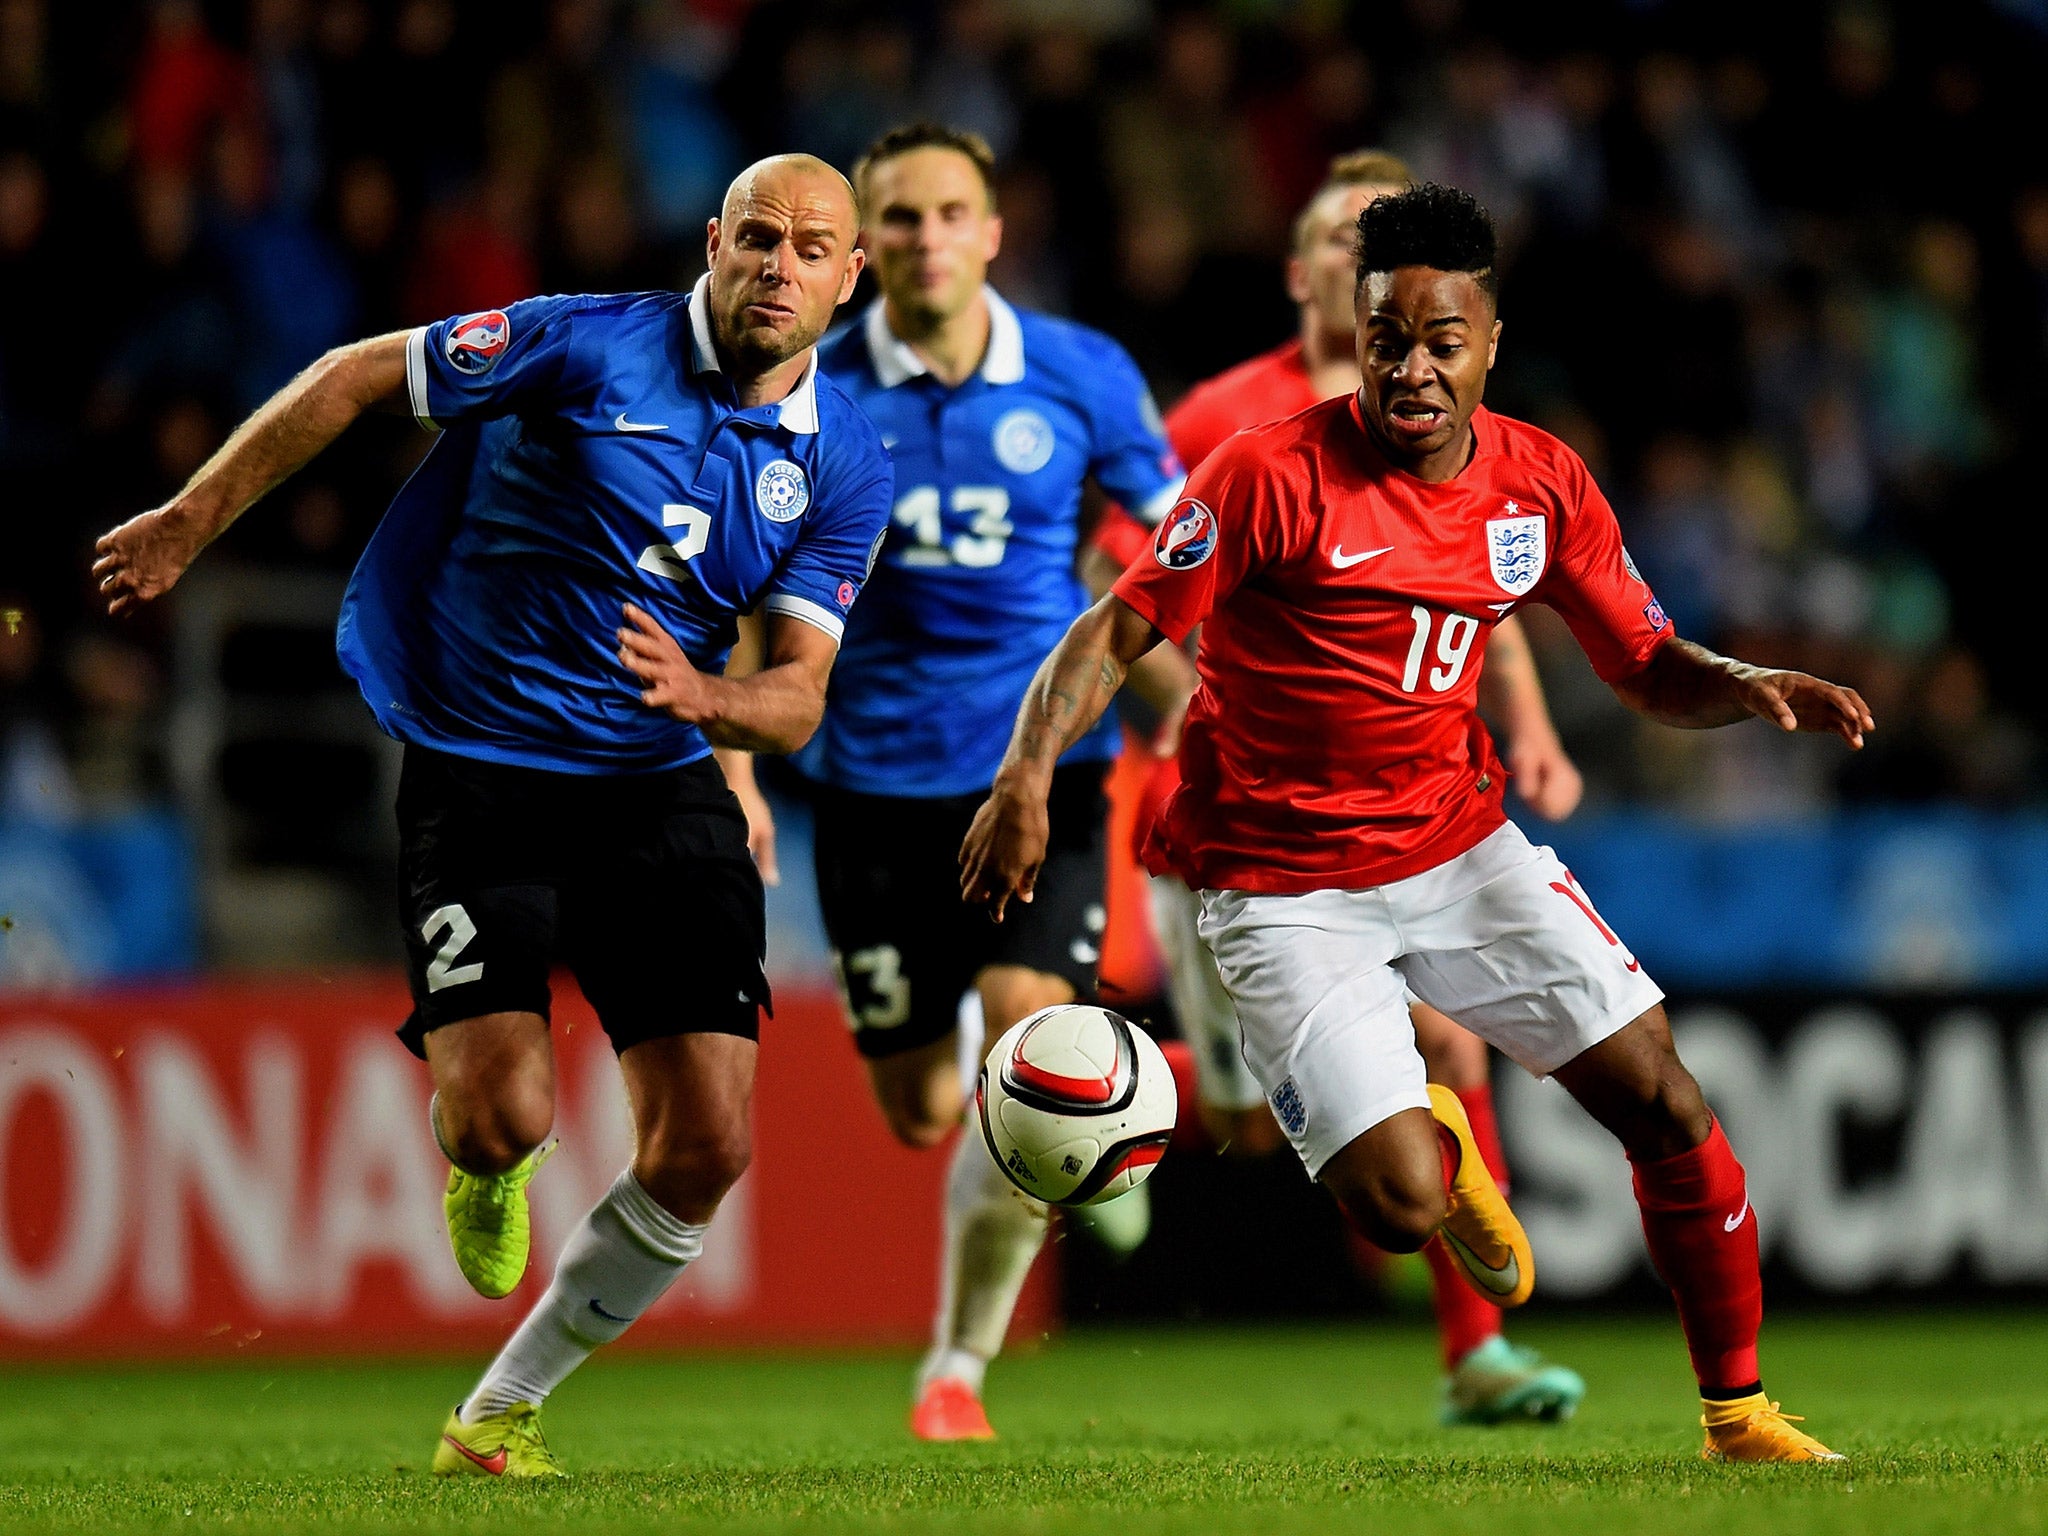 Raheem Sterling playing for England in last year's away fixture against Estonia